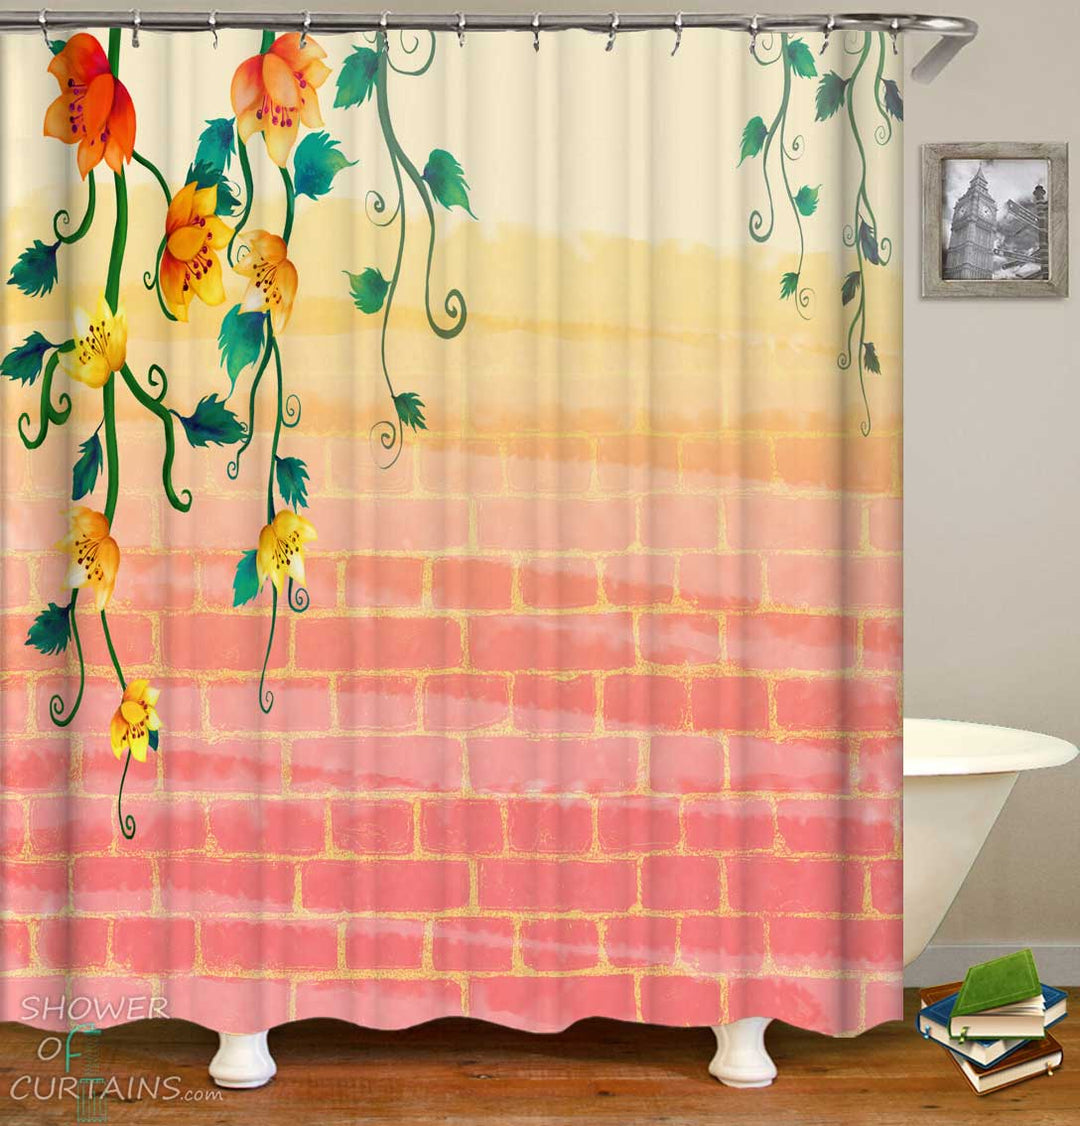 Shower Curtains with Pastel Colored Bricks Wall